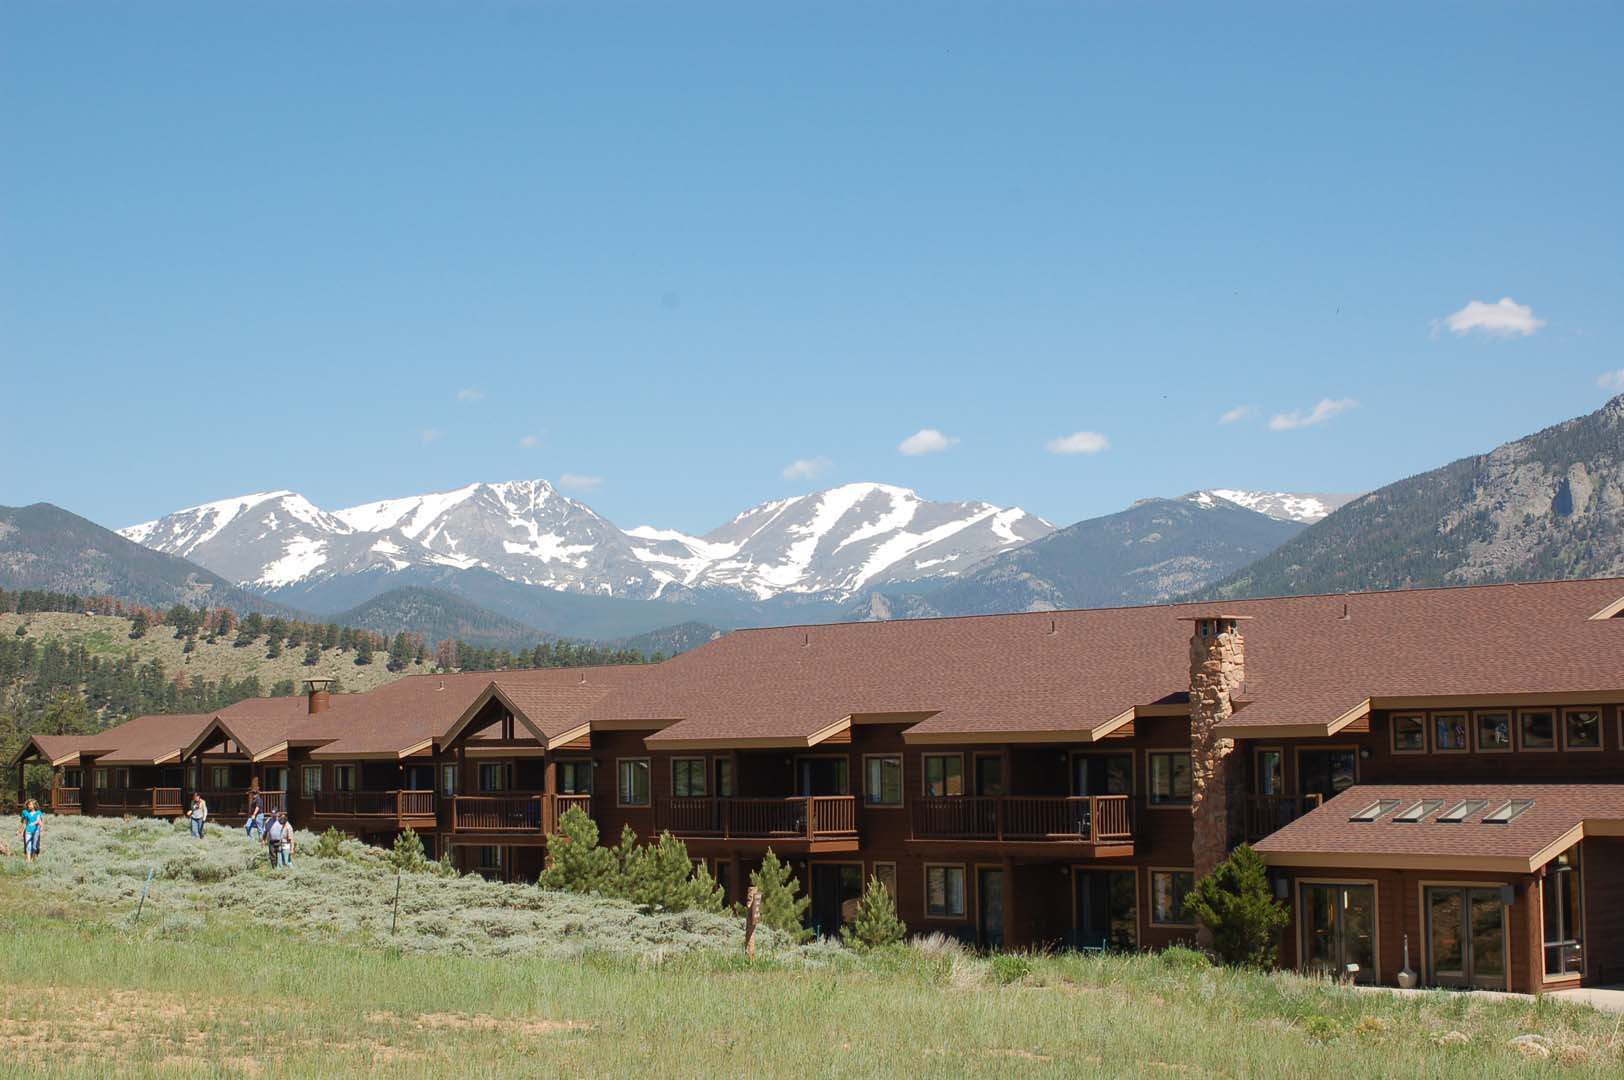 Lodge with mountains in background